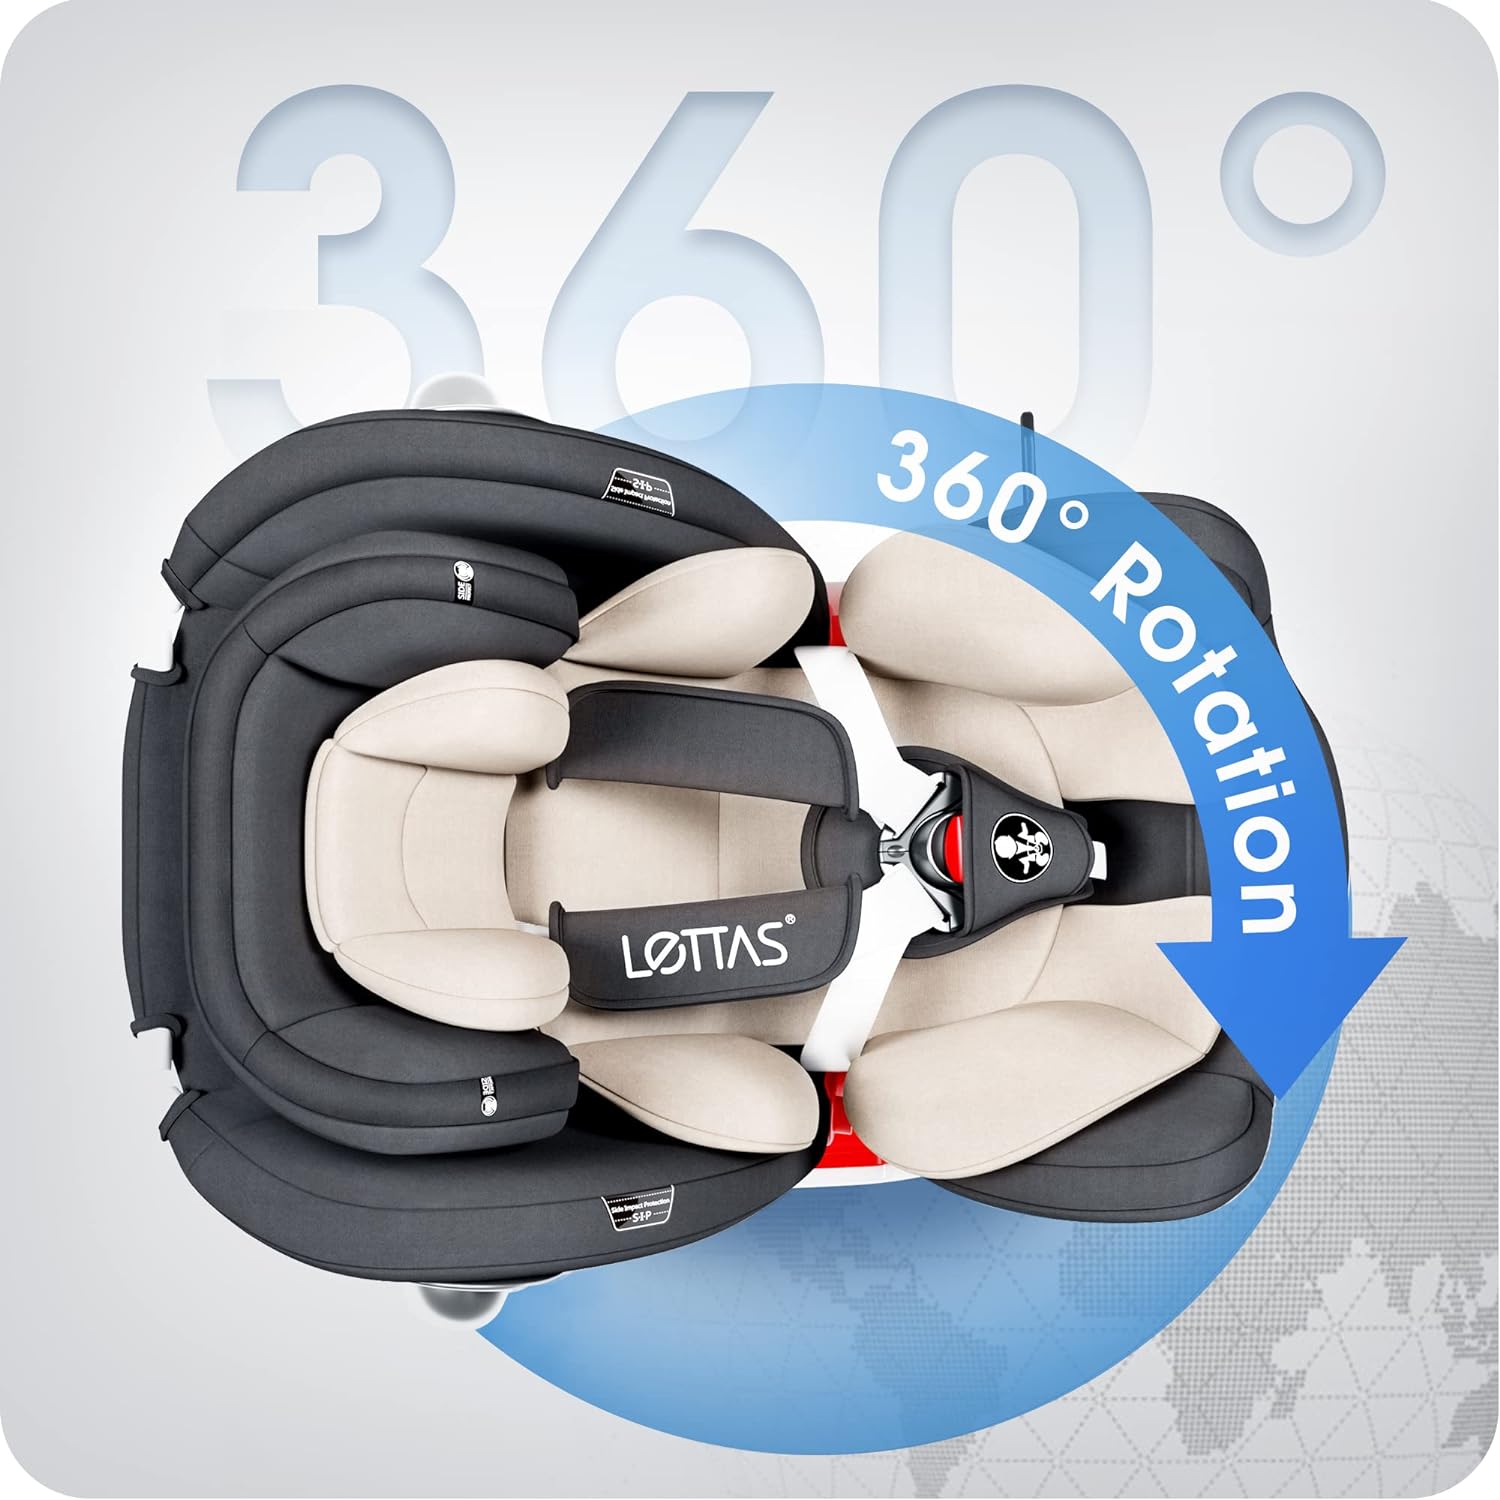 LETTAS Child Seat 360° Rotatable ISOFIX Top Tether Group 0+1/2/3 (0-36 kg) Side Protection Baby Car Seat ECE R44/04